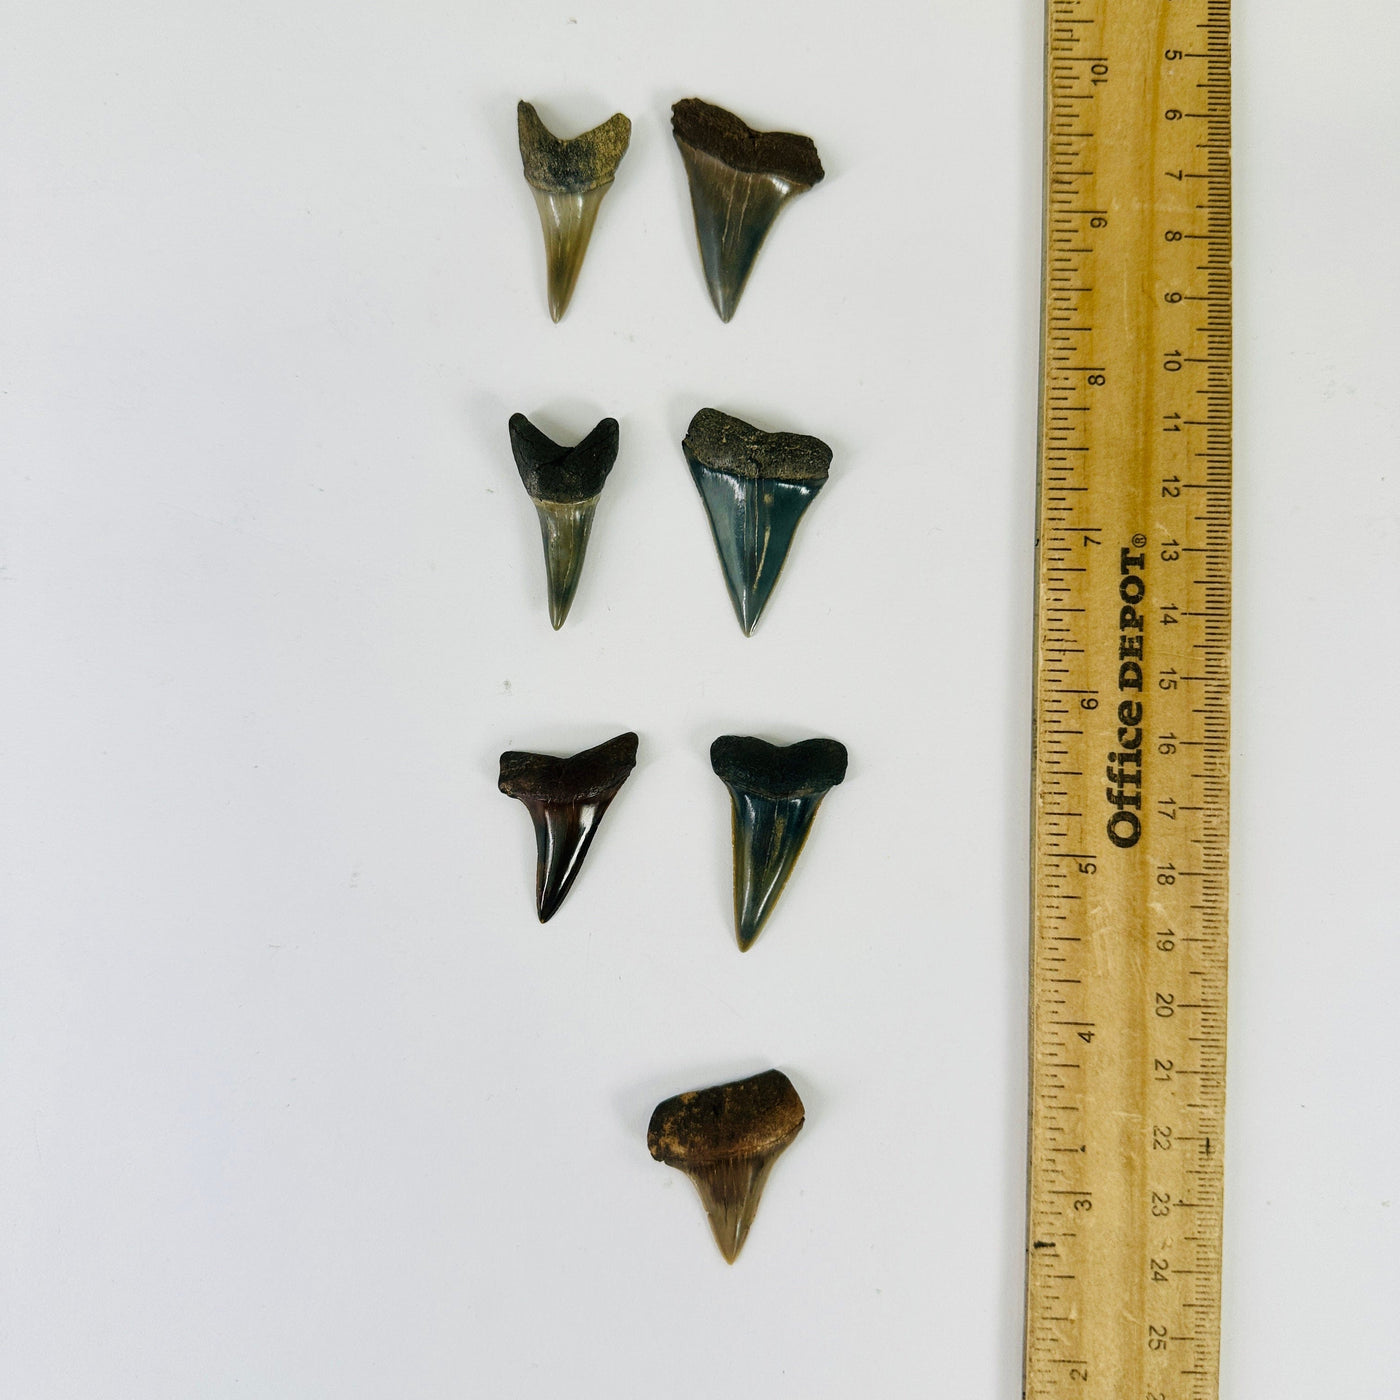 Mako Teeth - Polished Shark Teeth Fossils - You Choose all variants next to ruler for size reference